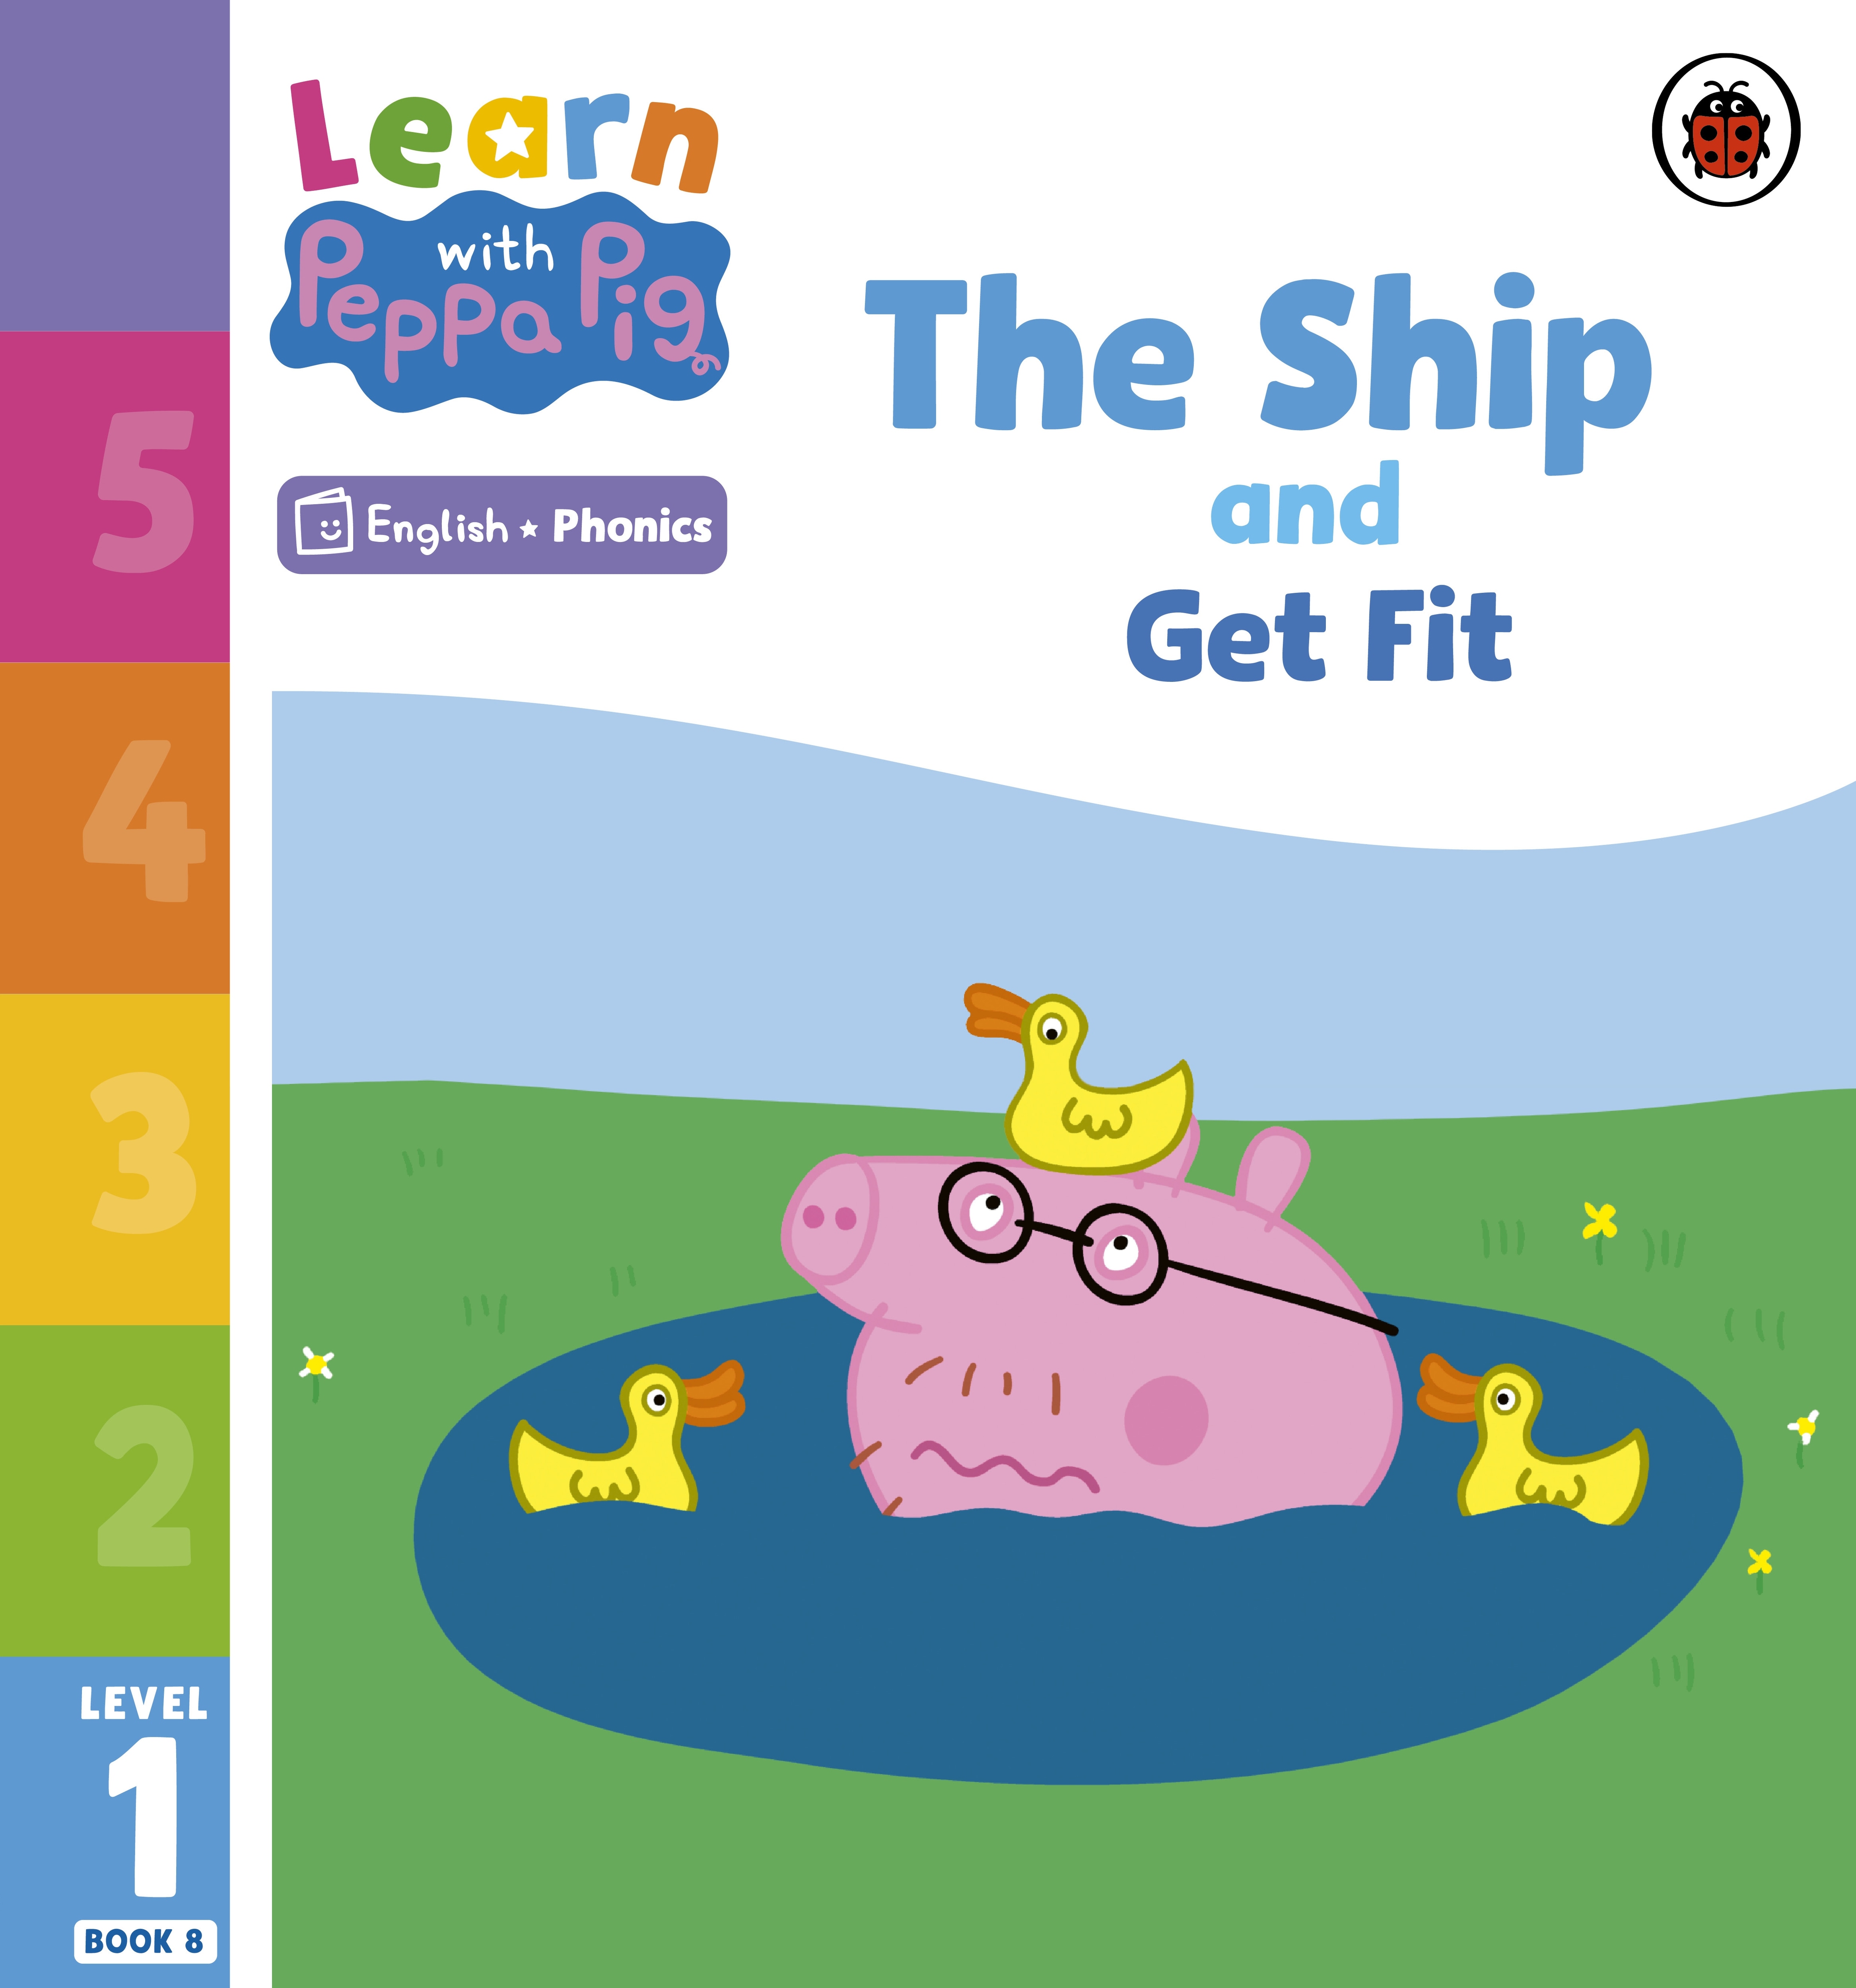 Book “Learn with Peppa Phonics Level 1 Book 8 — The Ship and Get Fit (Phonics Reader)” by Peppa Pig — January 5, 2023